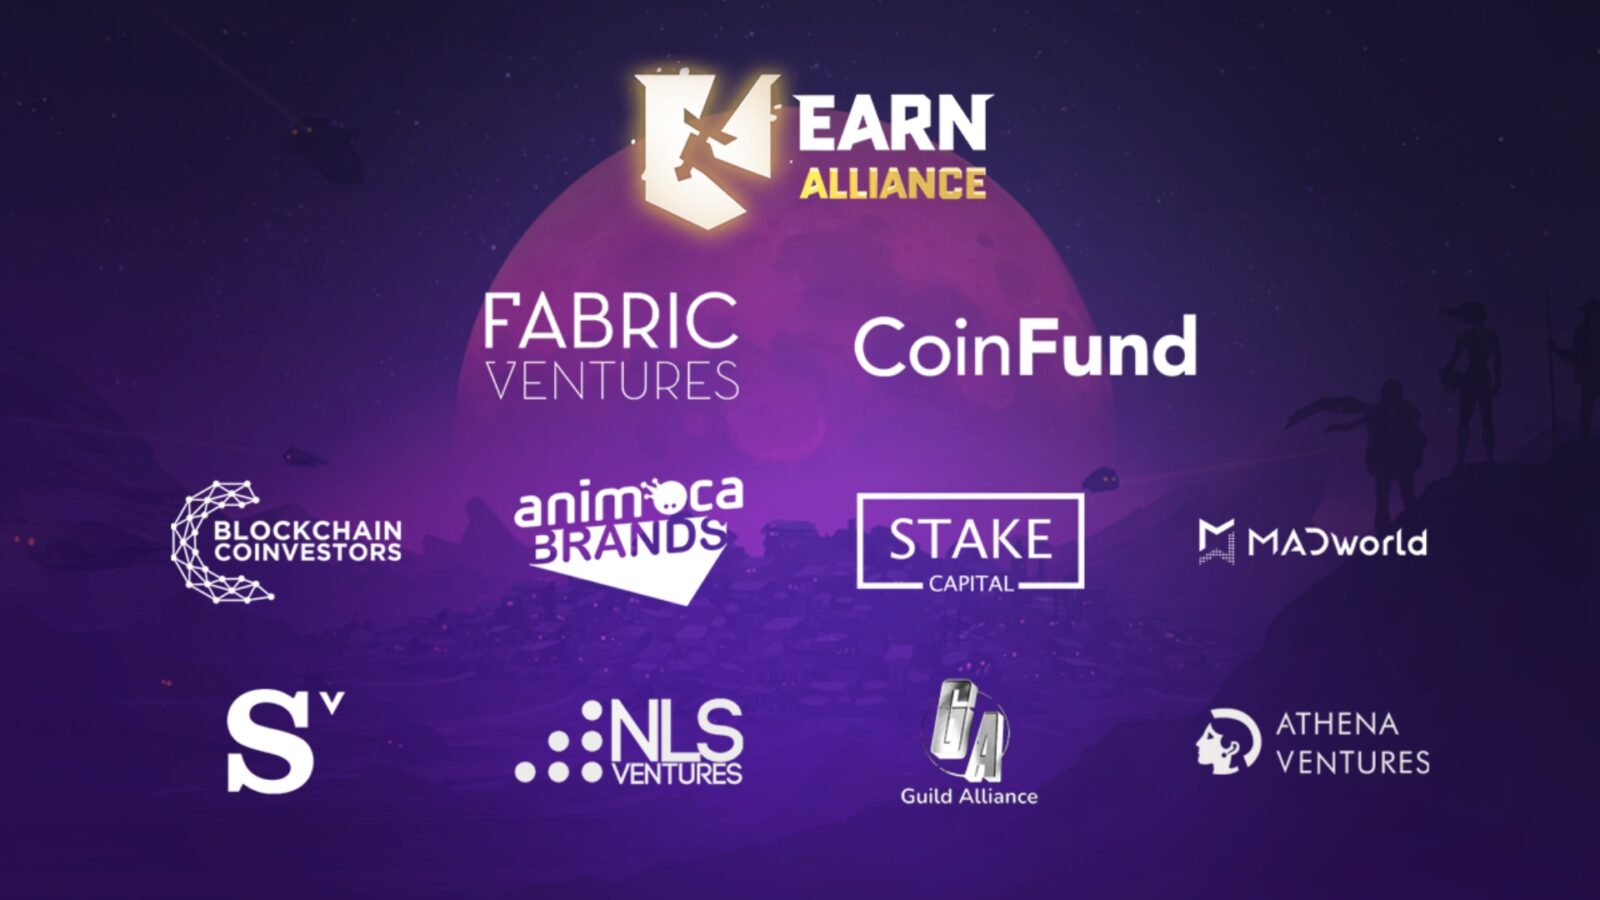 Web3 Platform Earn Alliance Raises $4.7M With Participation From Animoca Brands